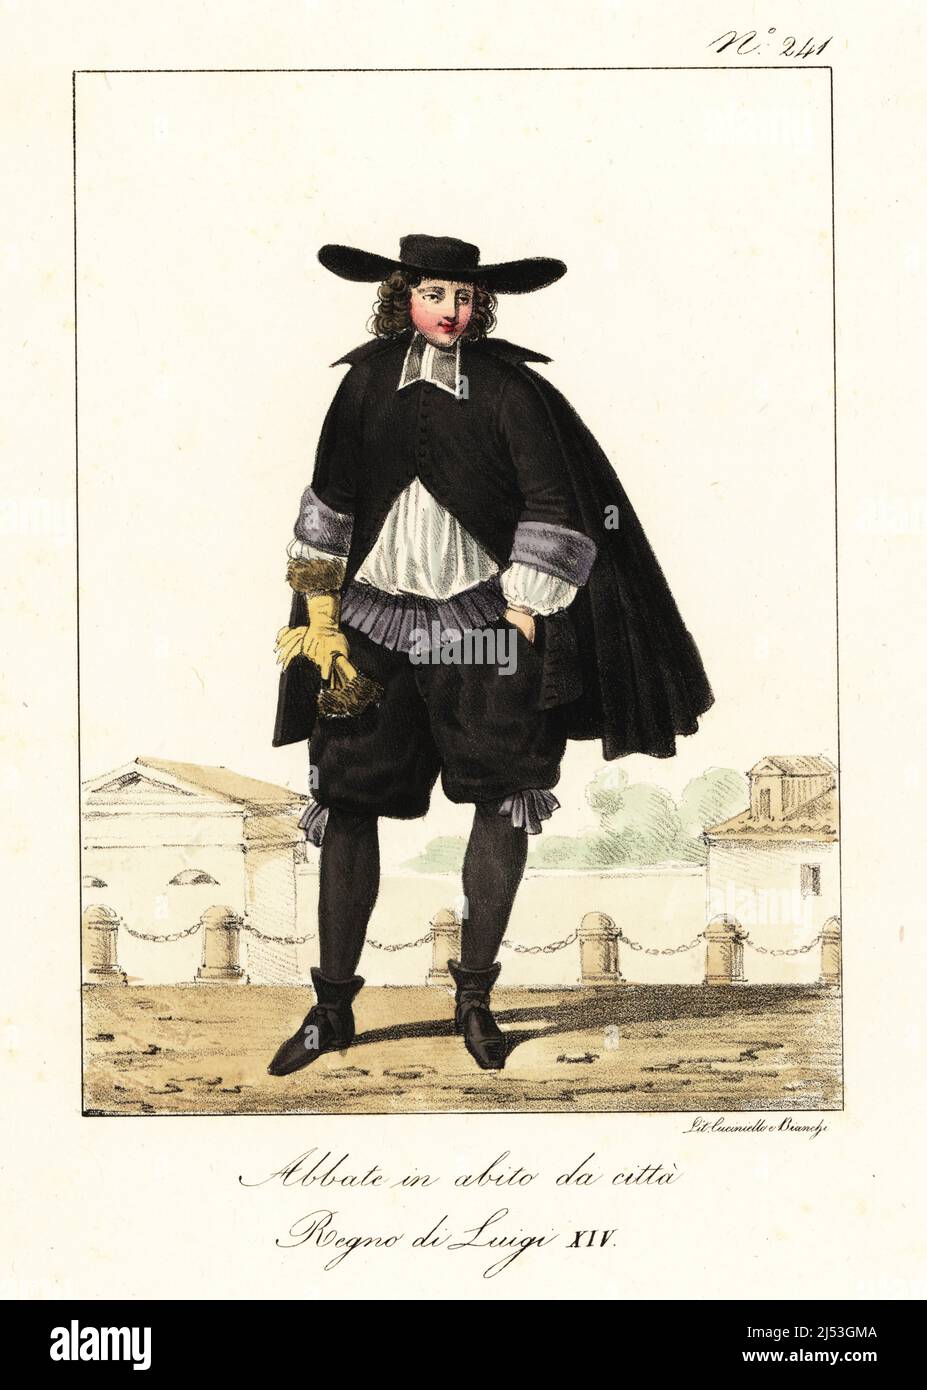 Costume of a French abbot, 17th century. In wide-brim hat, black coat and breeches, white shirt, garters, hose, bootlets, gloves. Abbe en habit de ville. Regne de Louis XIV. Handcoloured lithograph by Lorenzo Bianchi and Domenico Cuciniello after Hippolyte Lecomte from Costumi civili e militari della monarchia francese dal 1200 al 1820, Naples, 1825. Italian edition of Lecomte’s Civilian and military costumes of the French monarchy from 1200 to 1820. Stock Photo